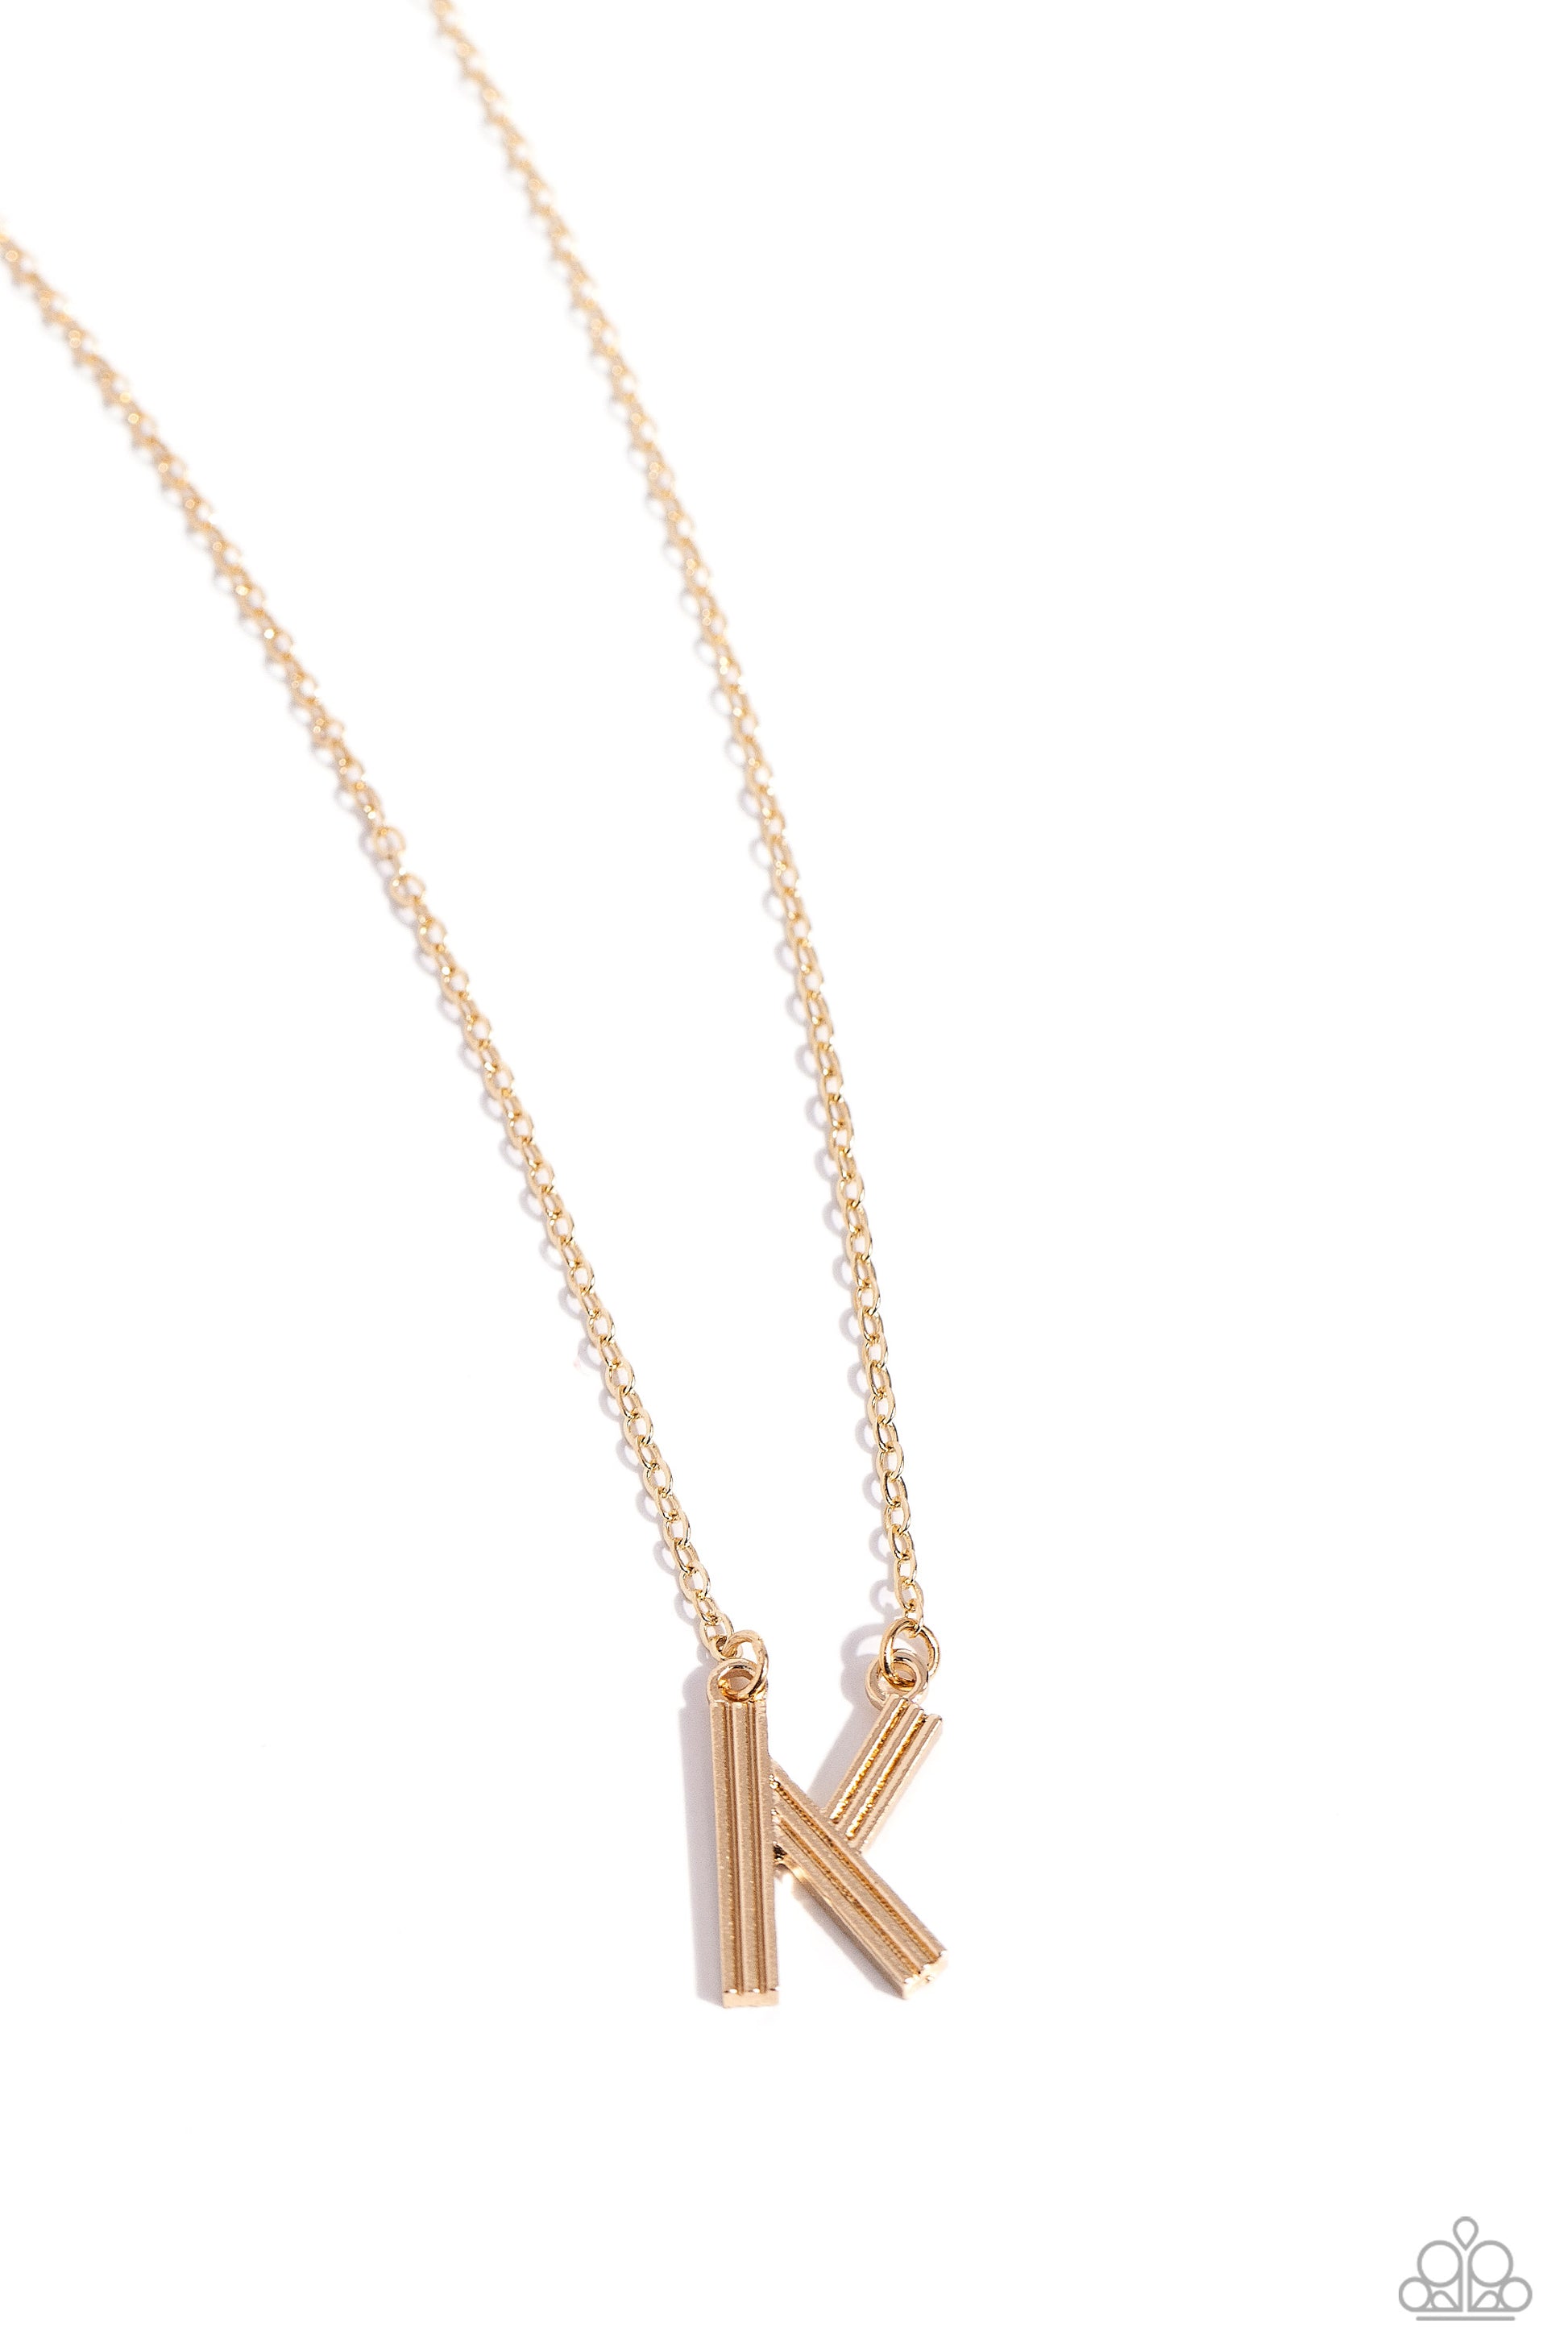 Leave Your Initials - gold - K - Paparazzi necklace